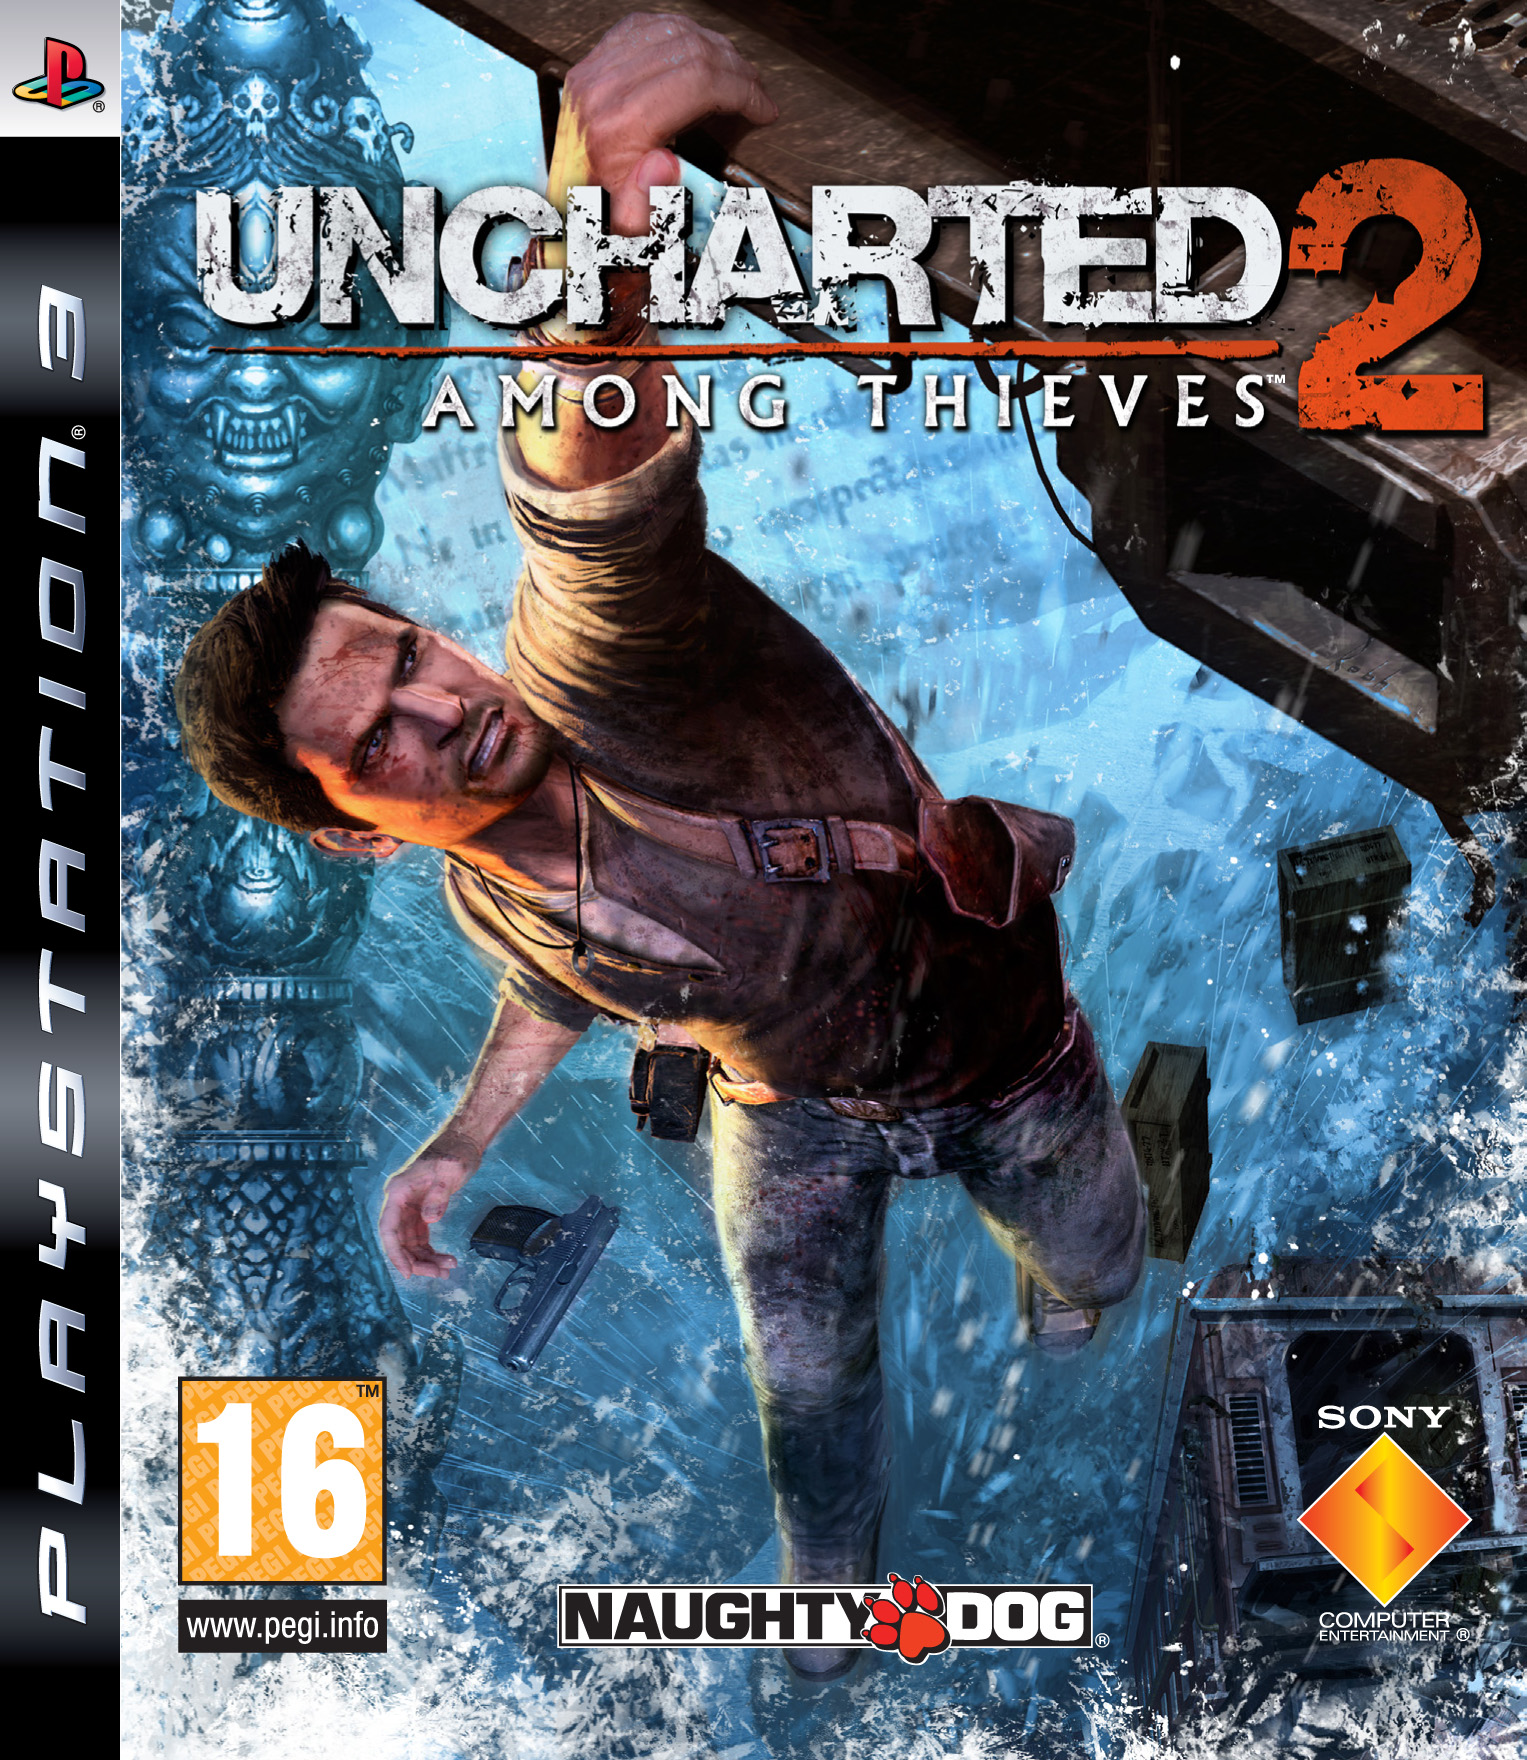 uncharted 3 playstation store